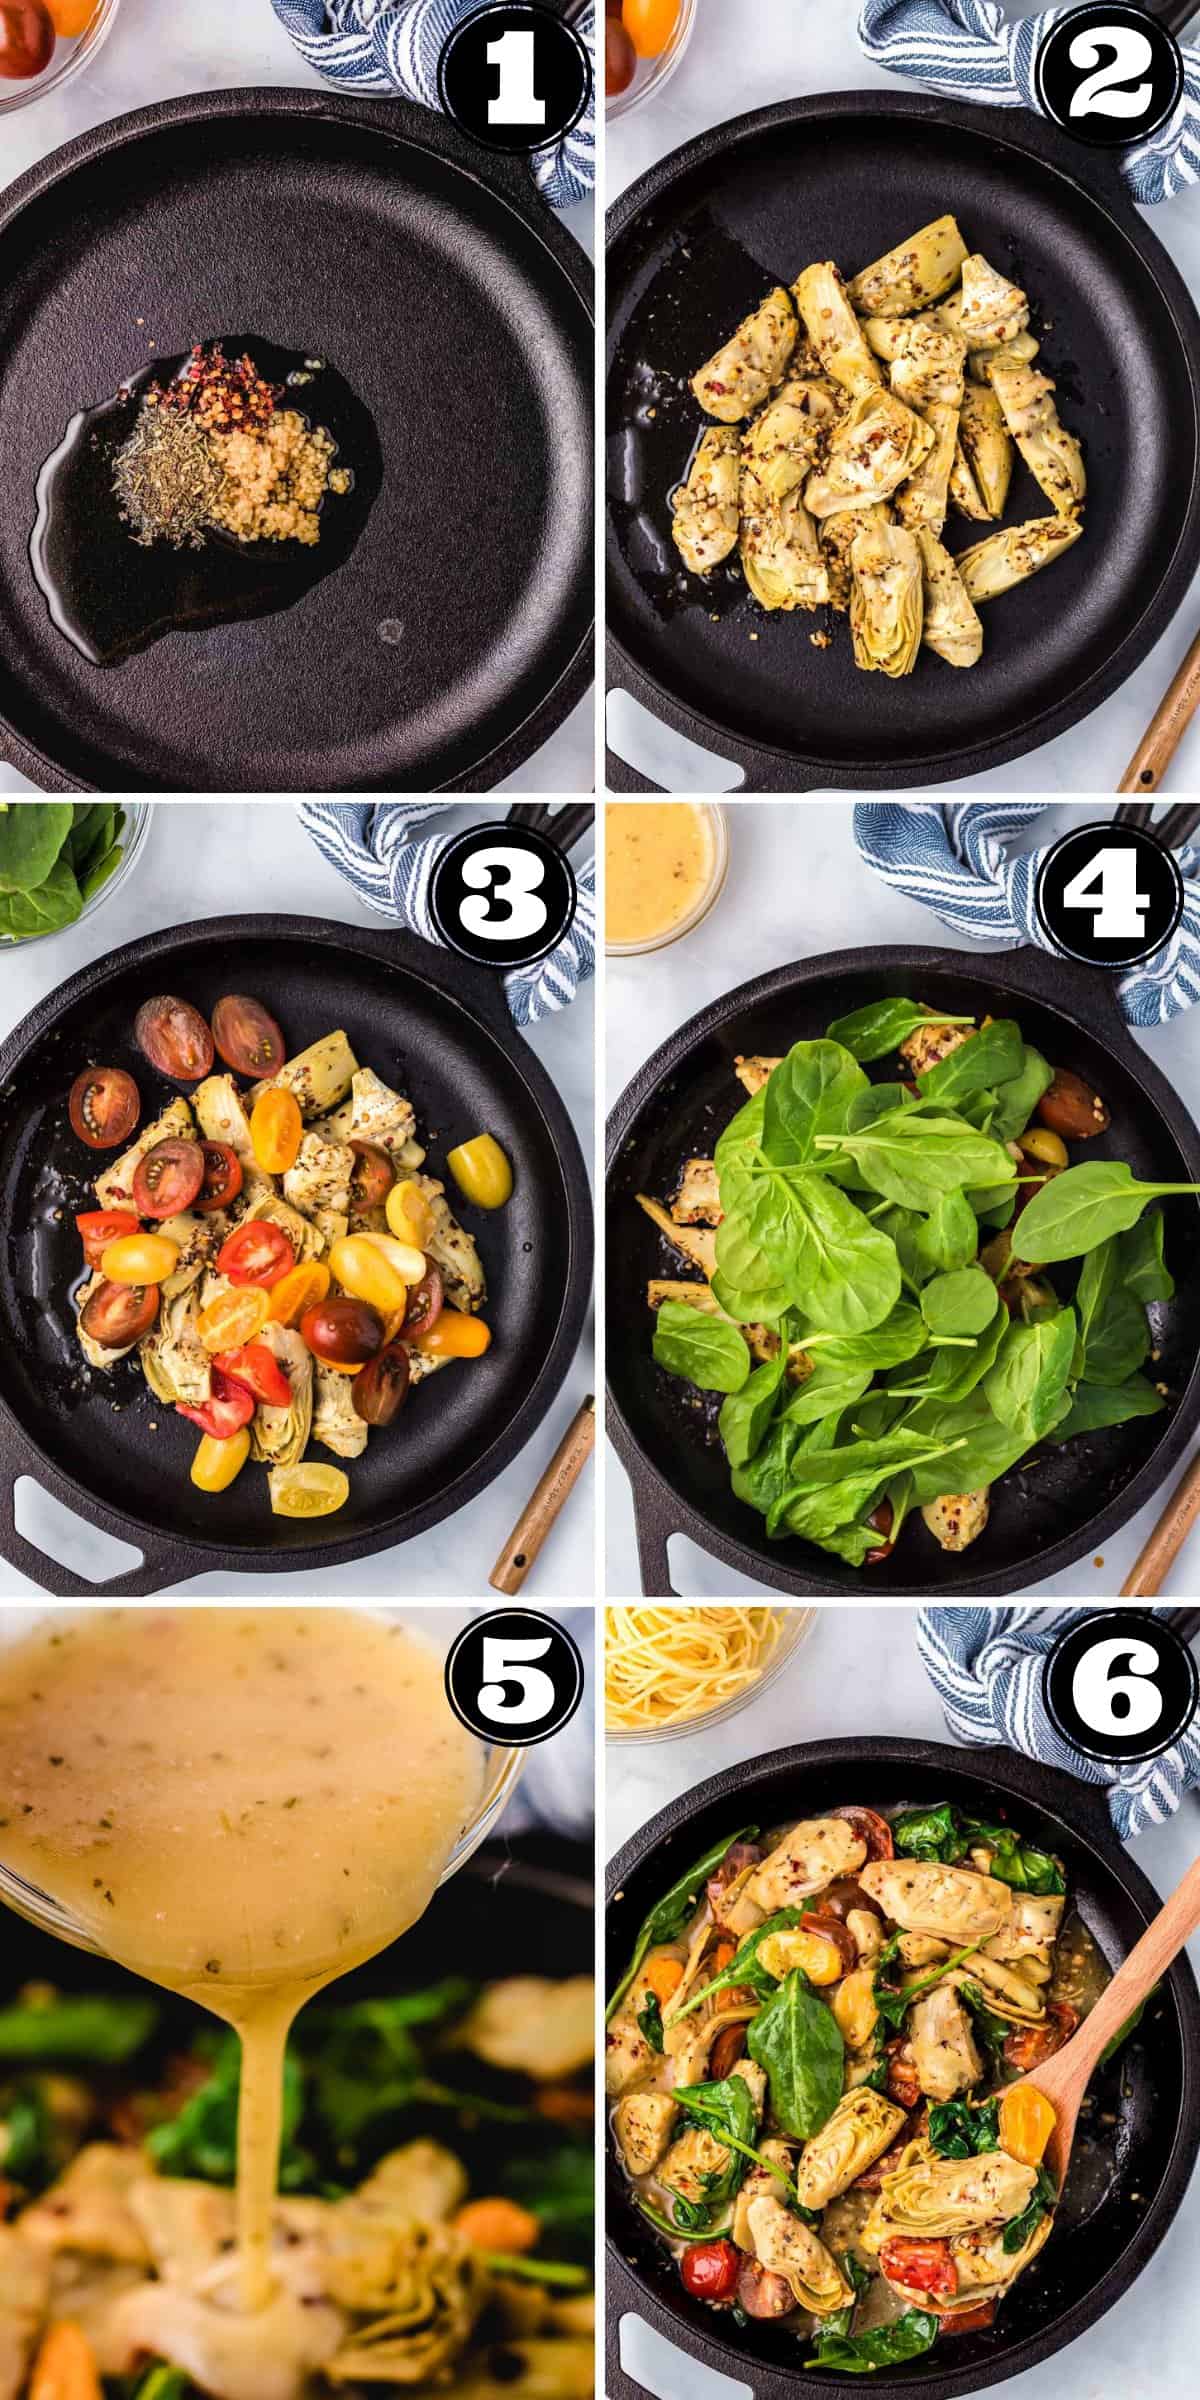 Collage image showings easy steps to making Italian artichoke medley in a skillet.